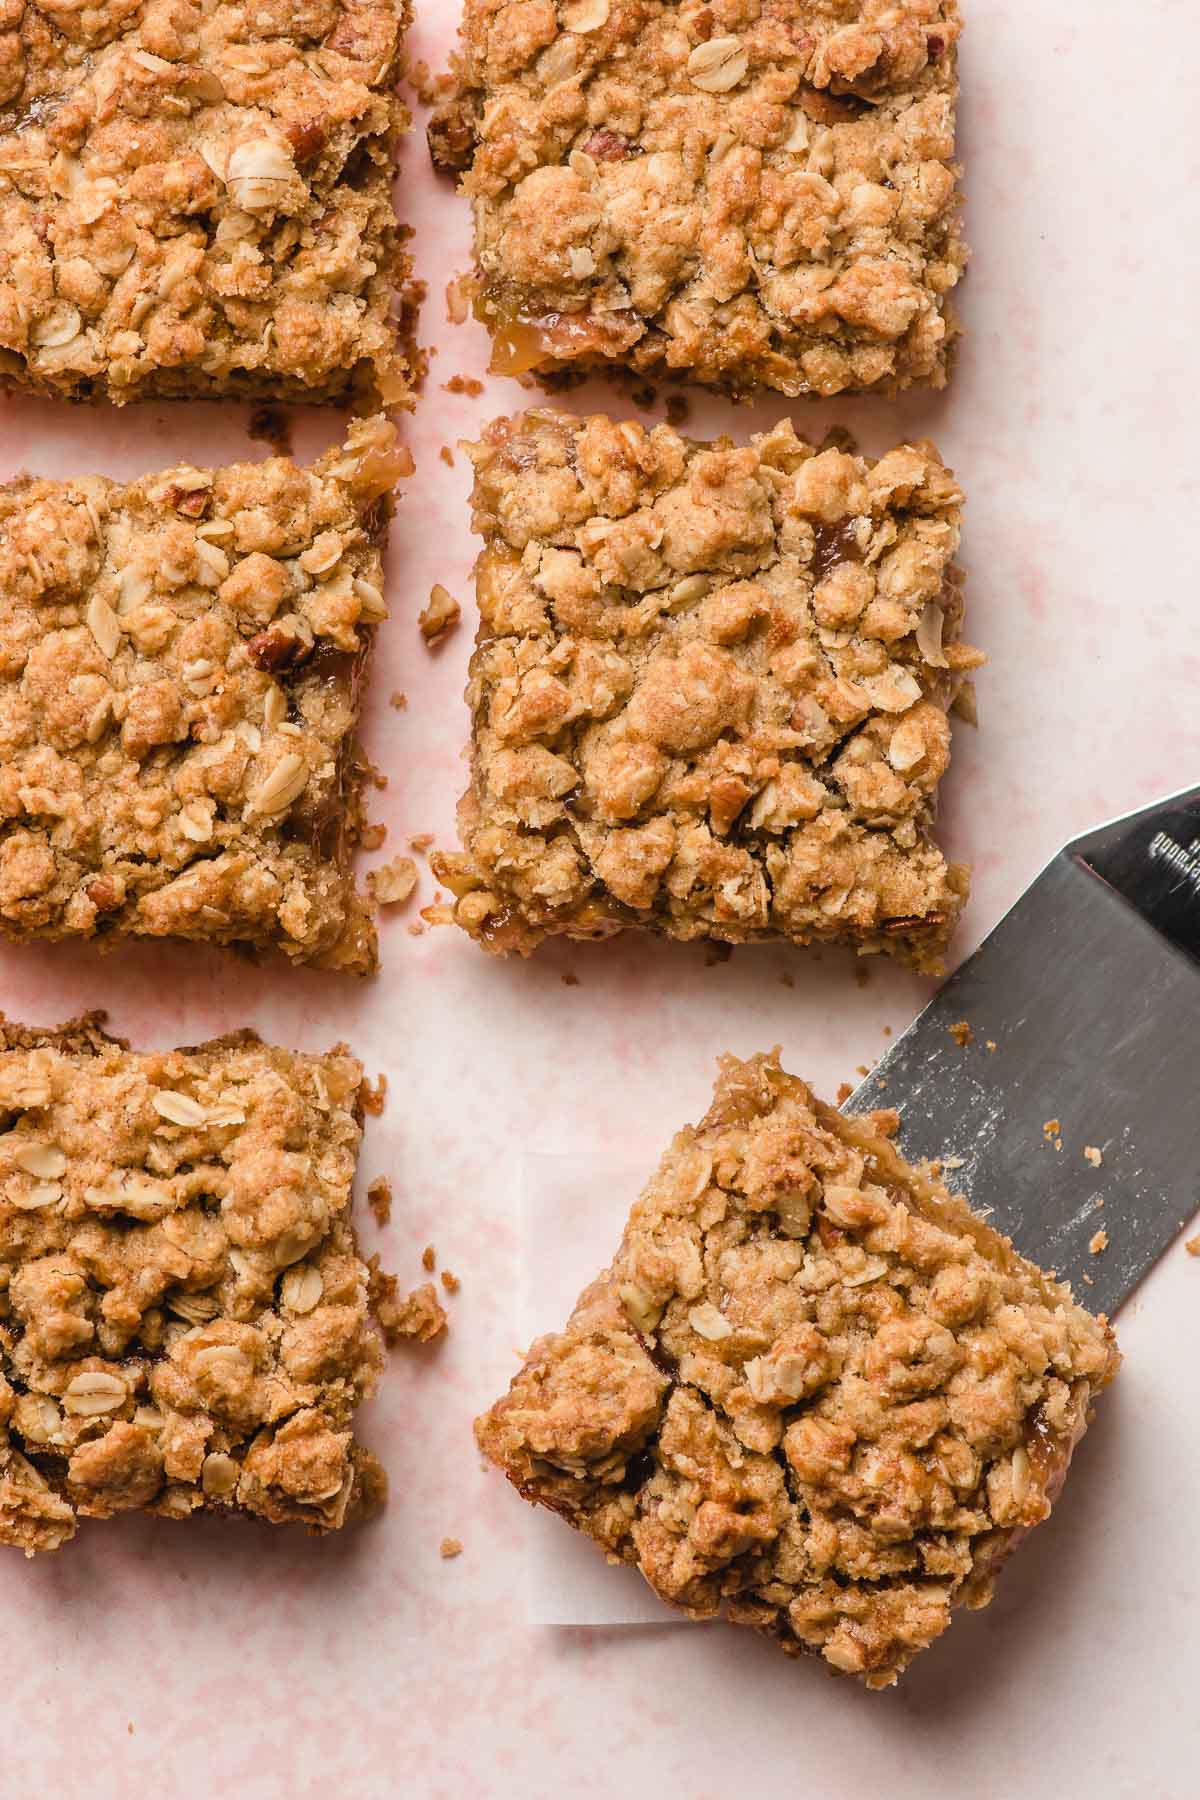 Rhubarb bars lined up in a row, with a spatula under one piece.